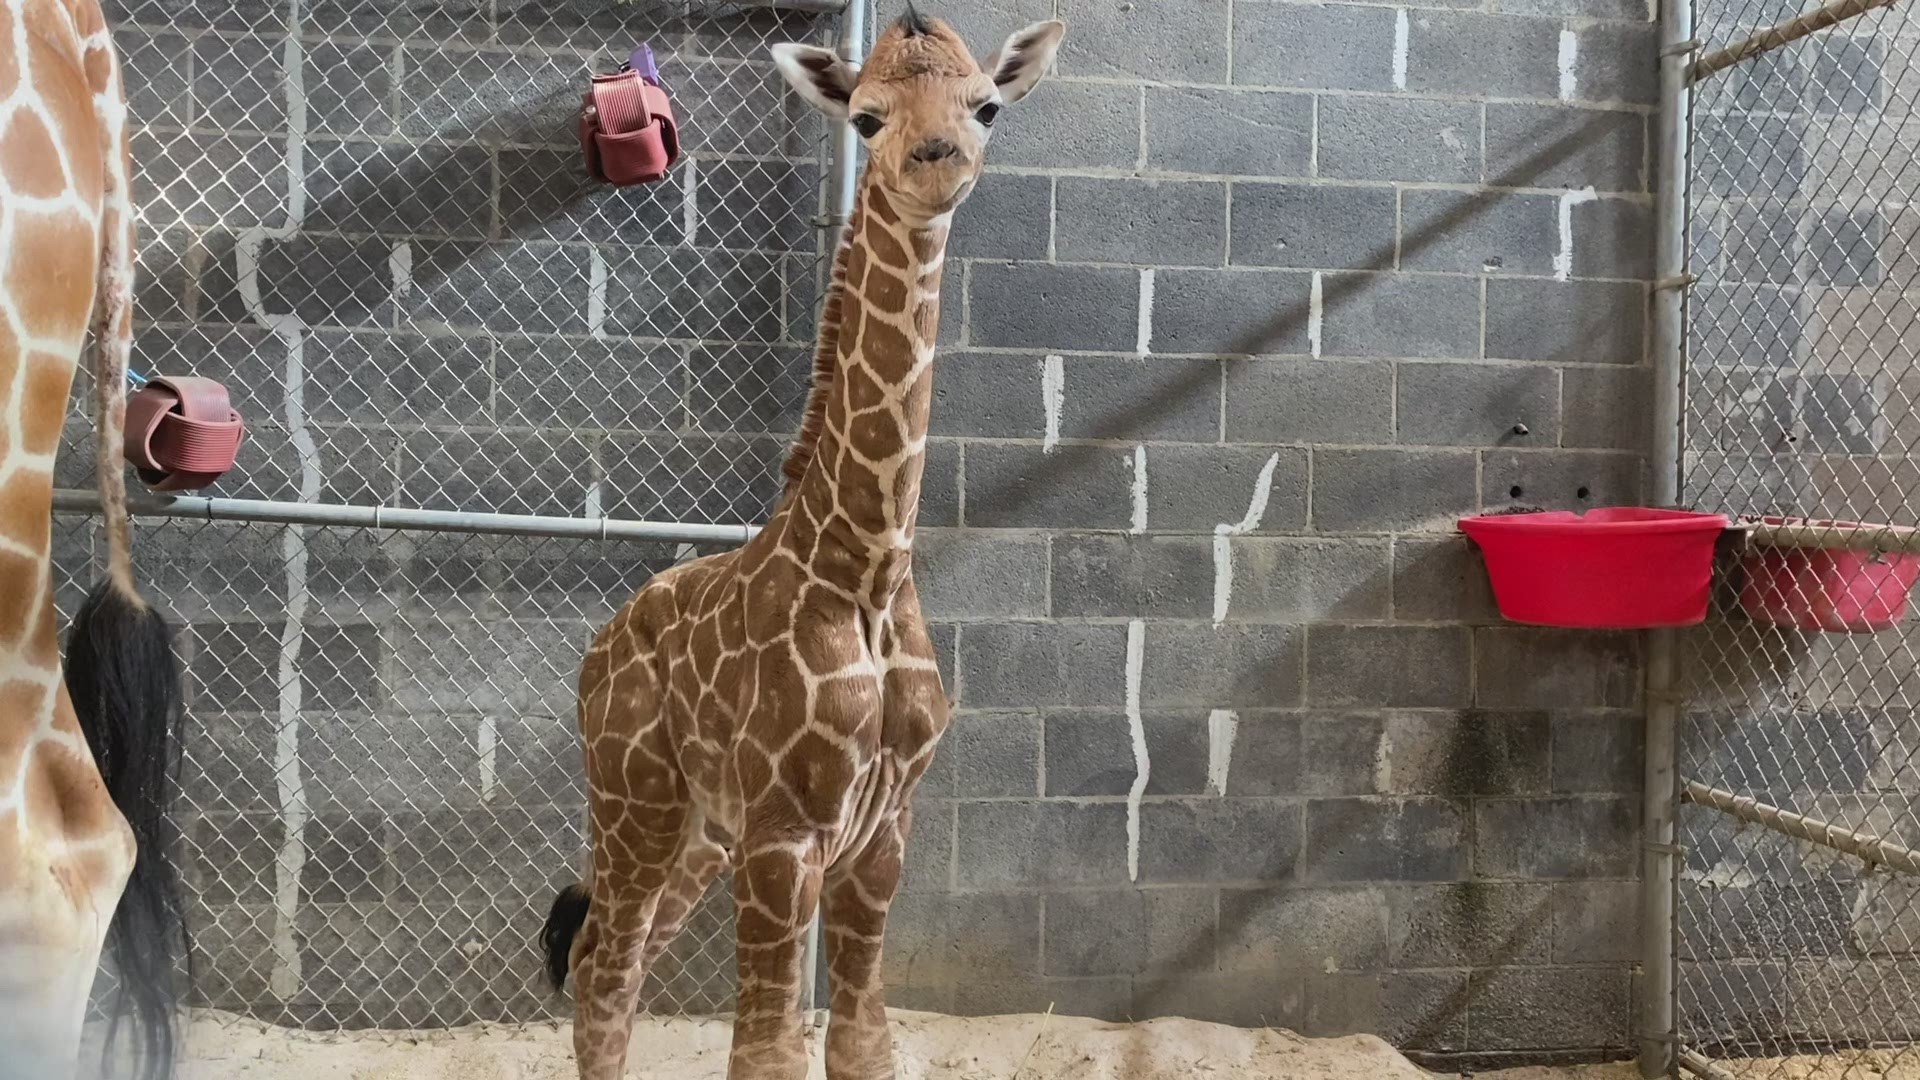 Frances the giraffe welcomed her second child  into the world with Jumbe on Christmas Eve morning at Zoo Knoxville.